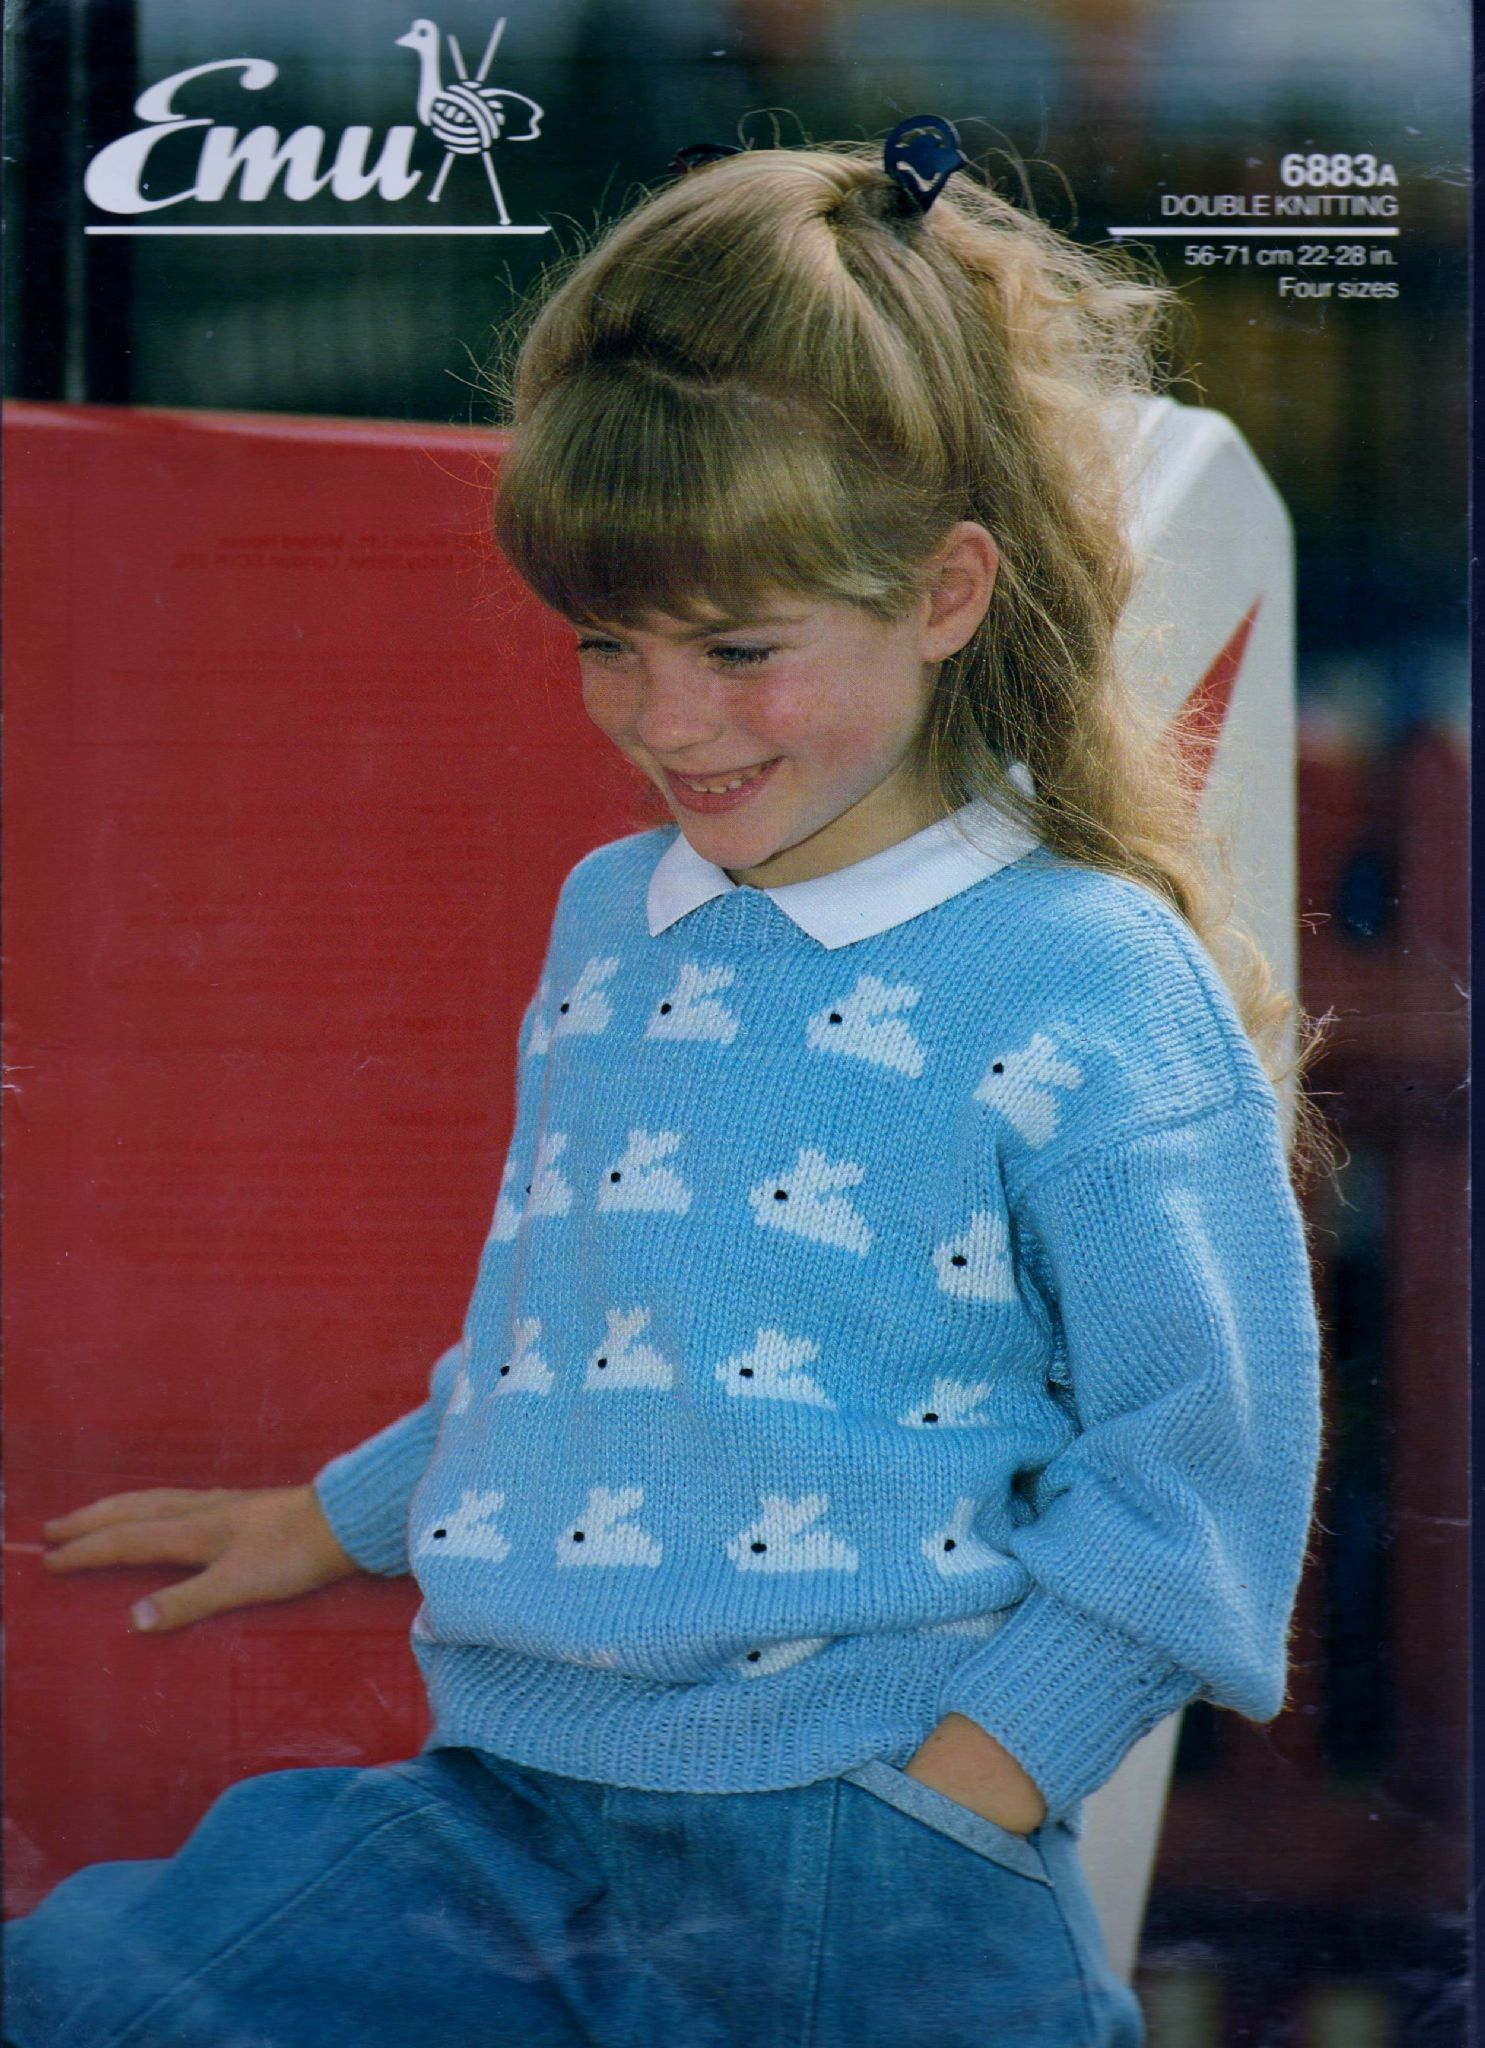 Intarsia Knit Patterns Original Vintage Knitting Pattern Ba Or Childs Bunny Rabbit Motif Intarsia Sweater Jumper Pullover In Double Knitting Chest 22 28